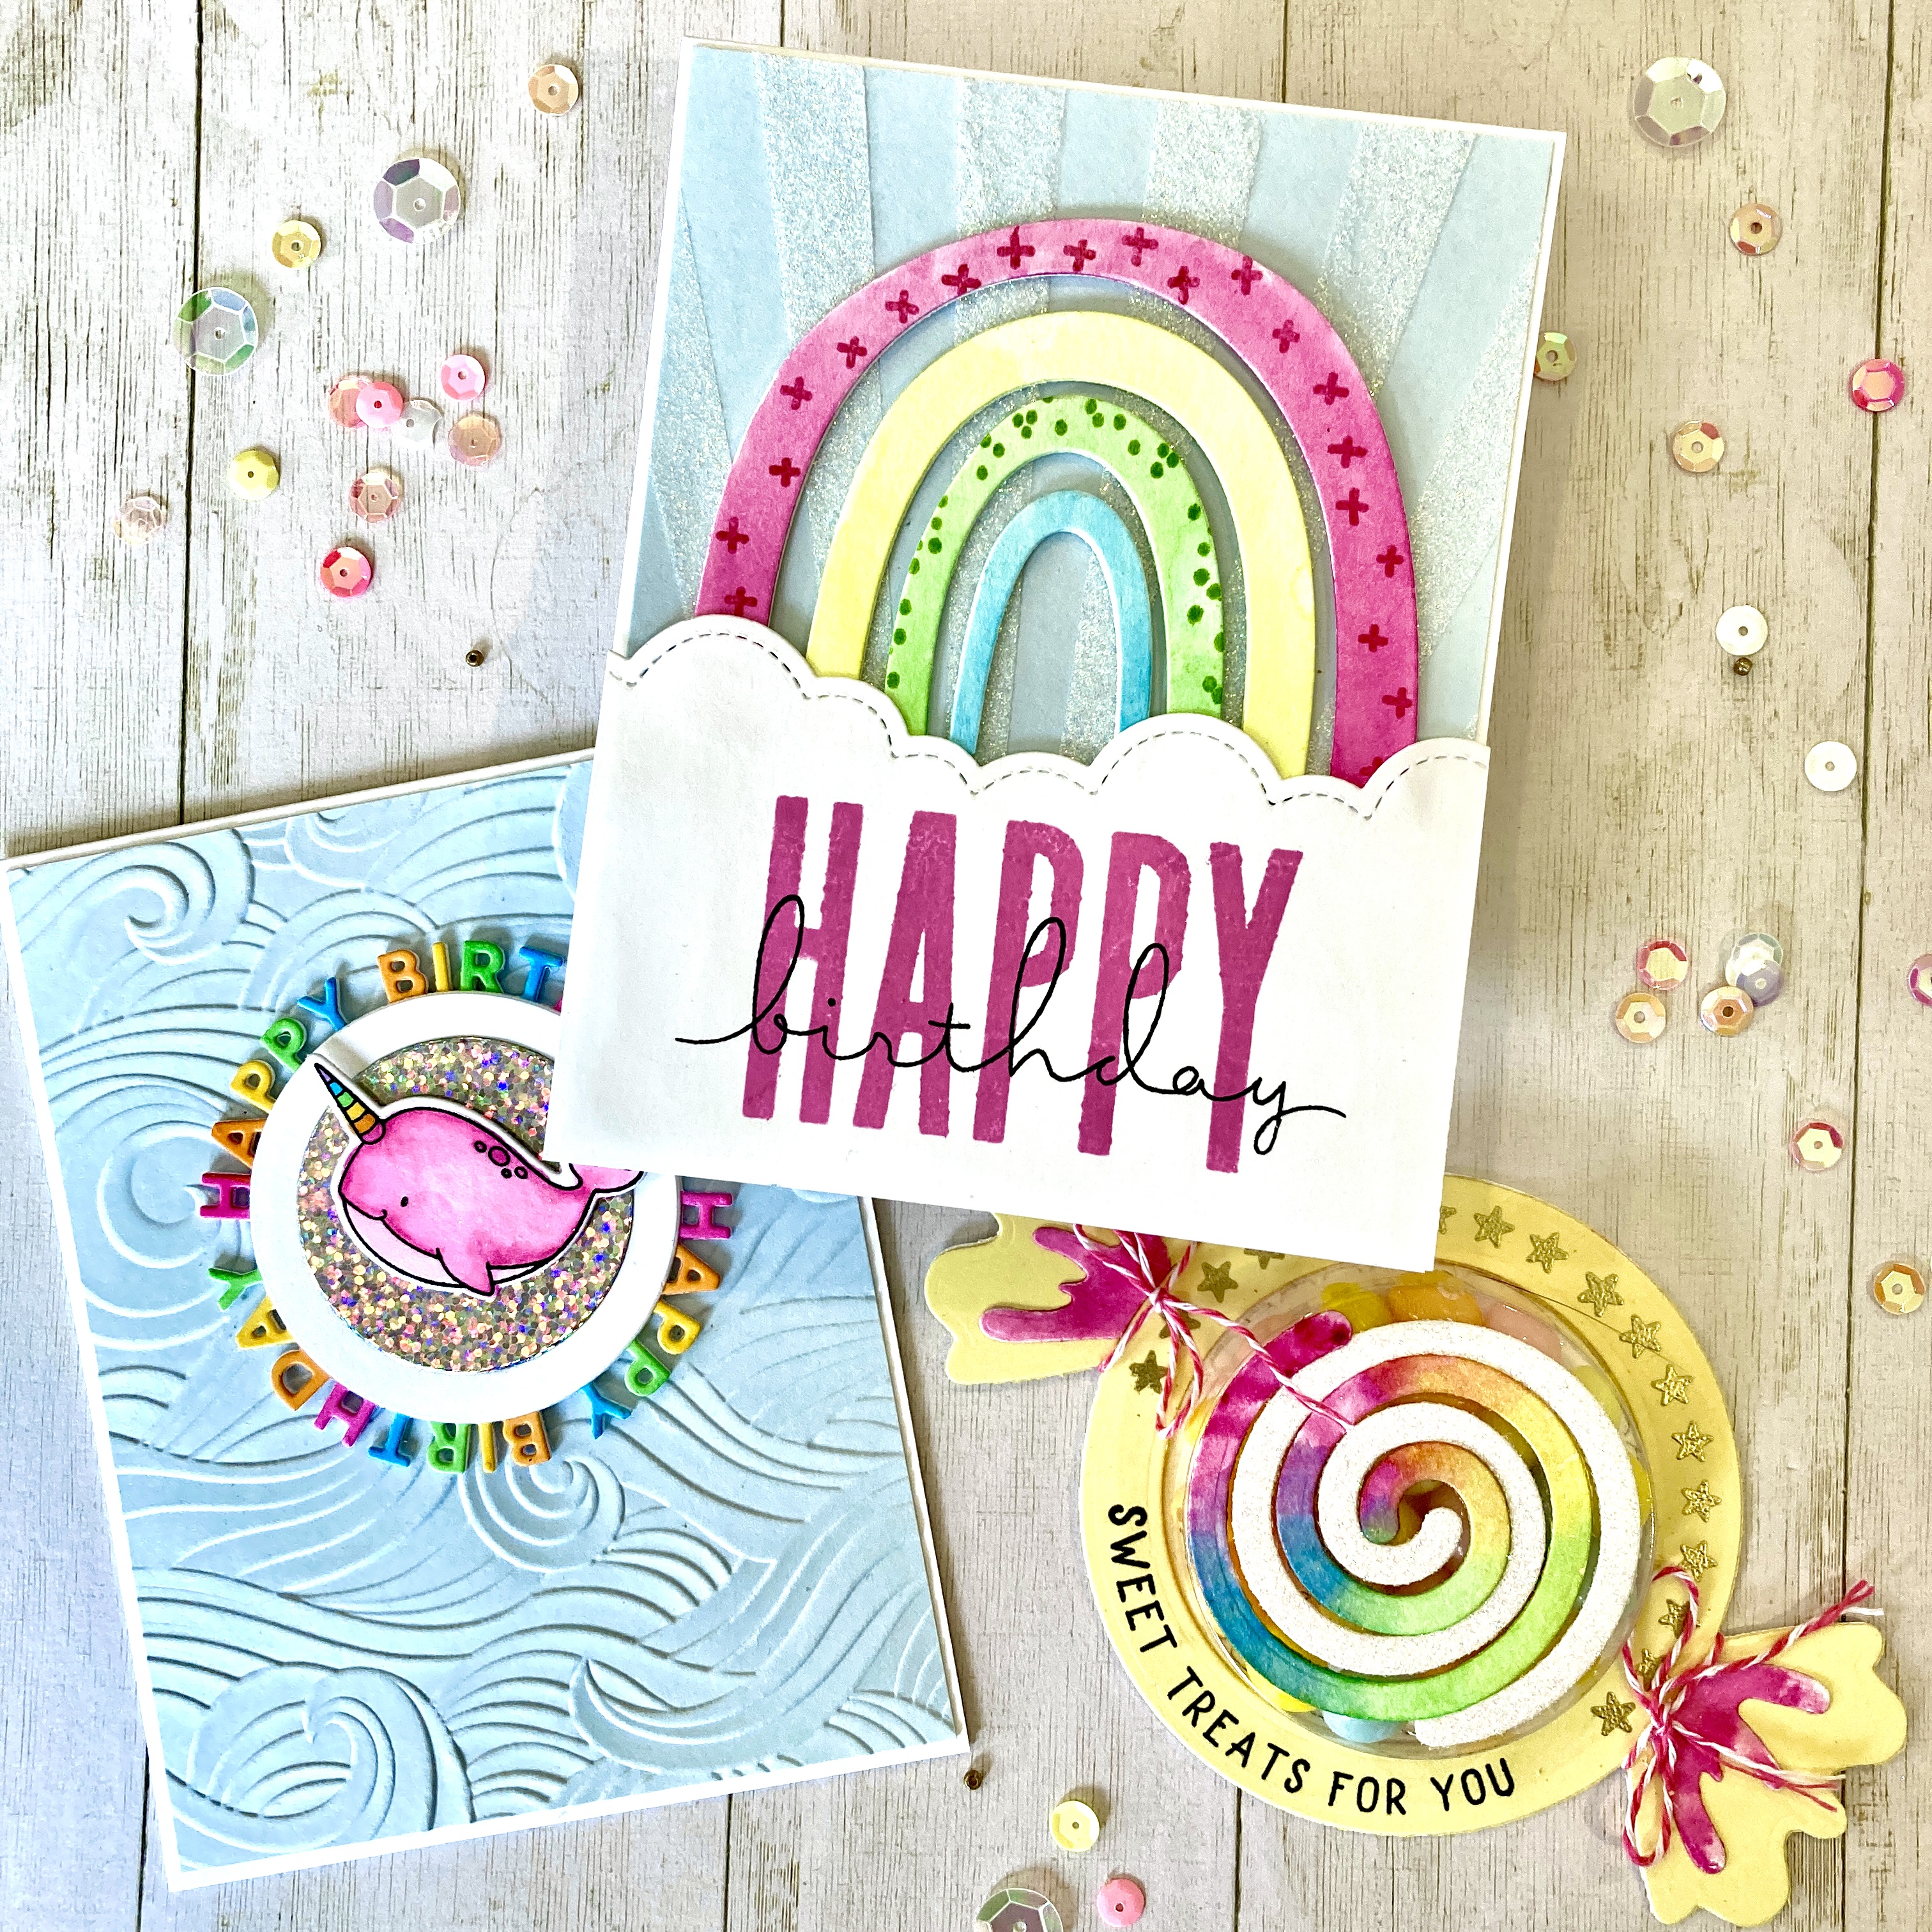 Dimensional Mixed Media Die Cuts with Honey Bee Stamps - {creative chick}